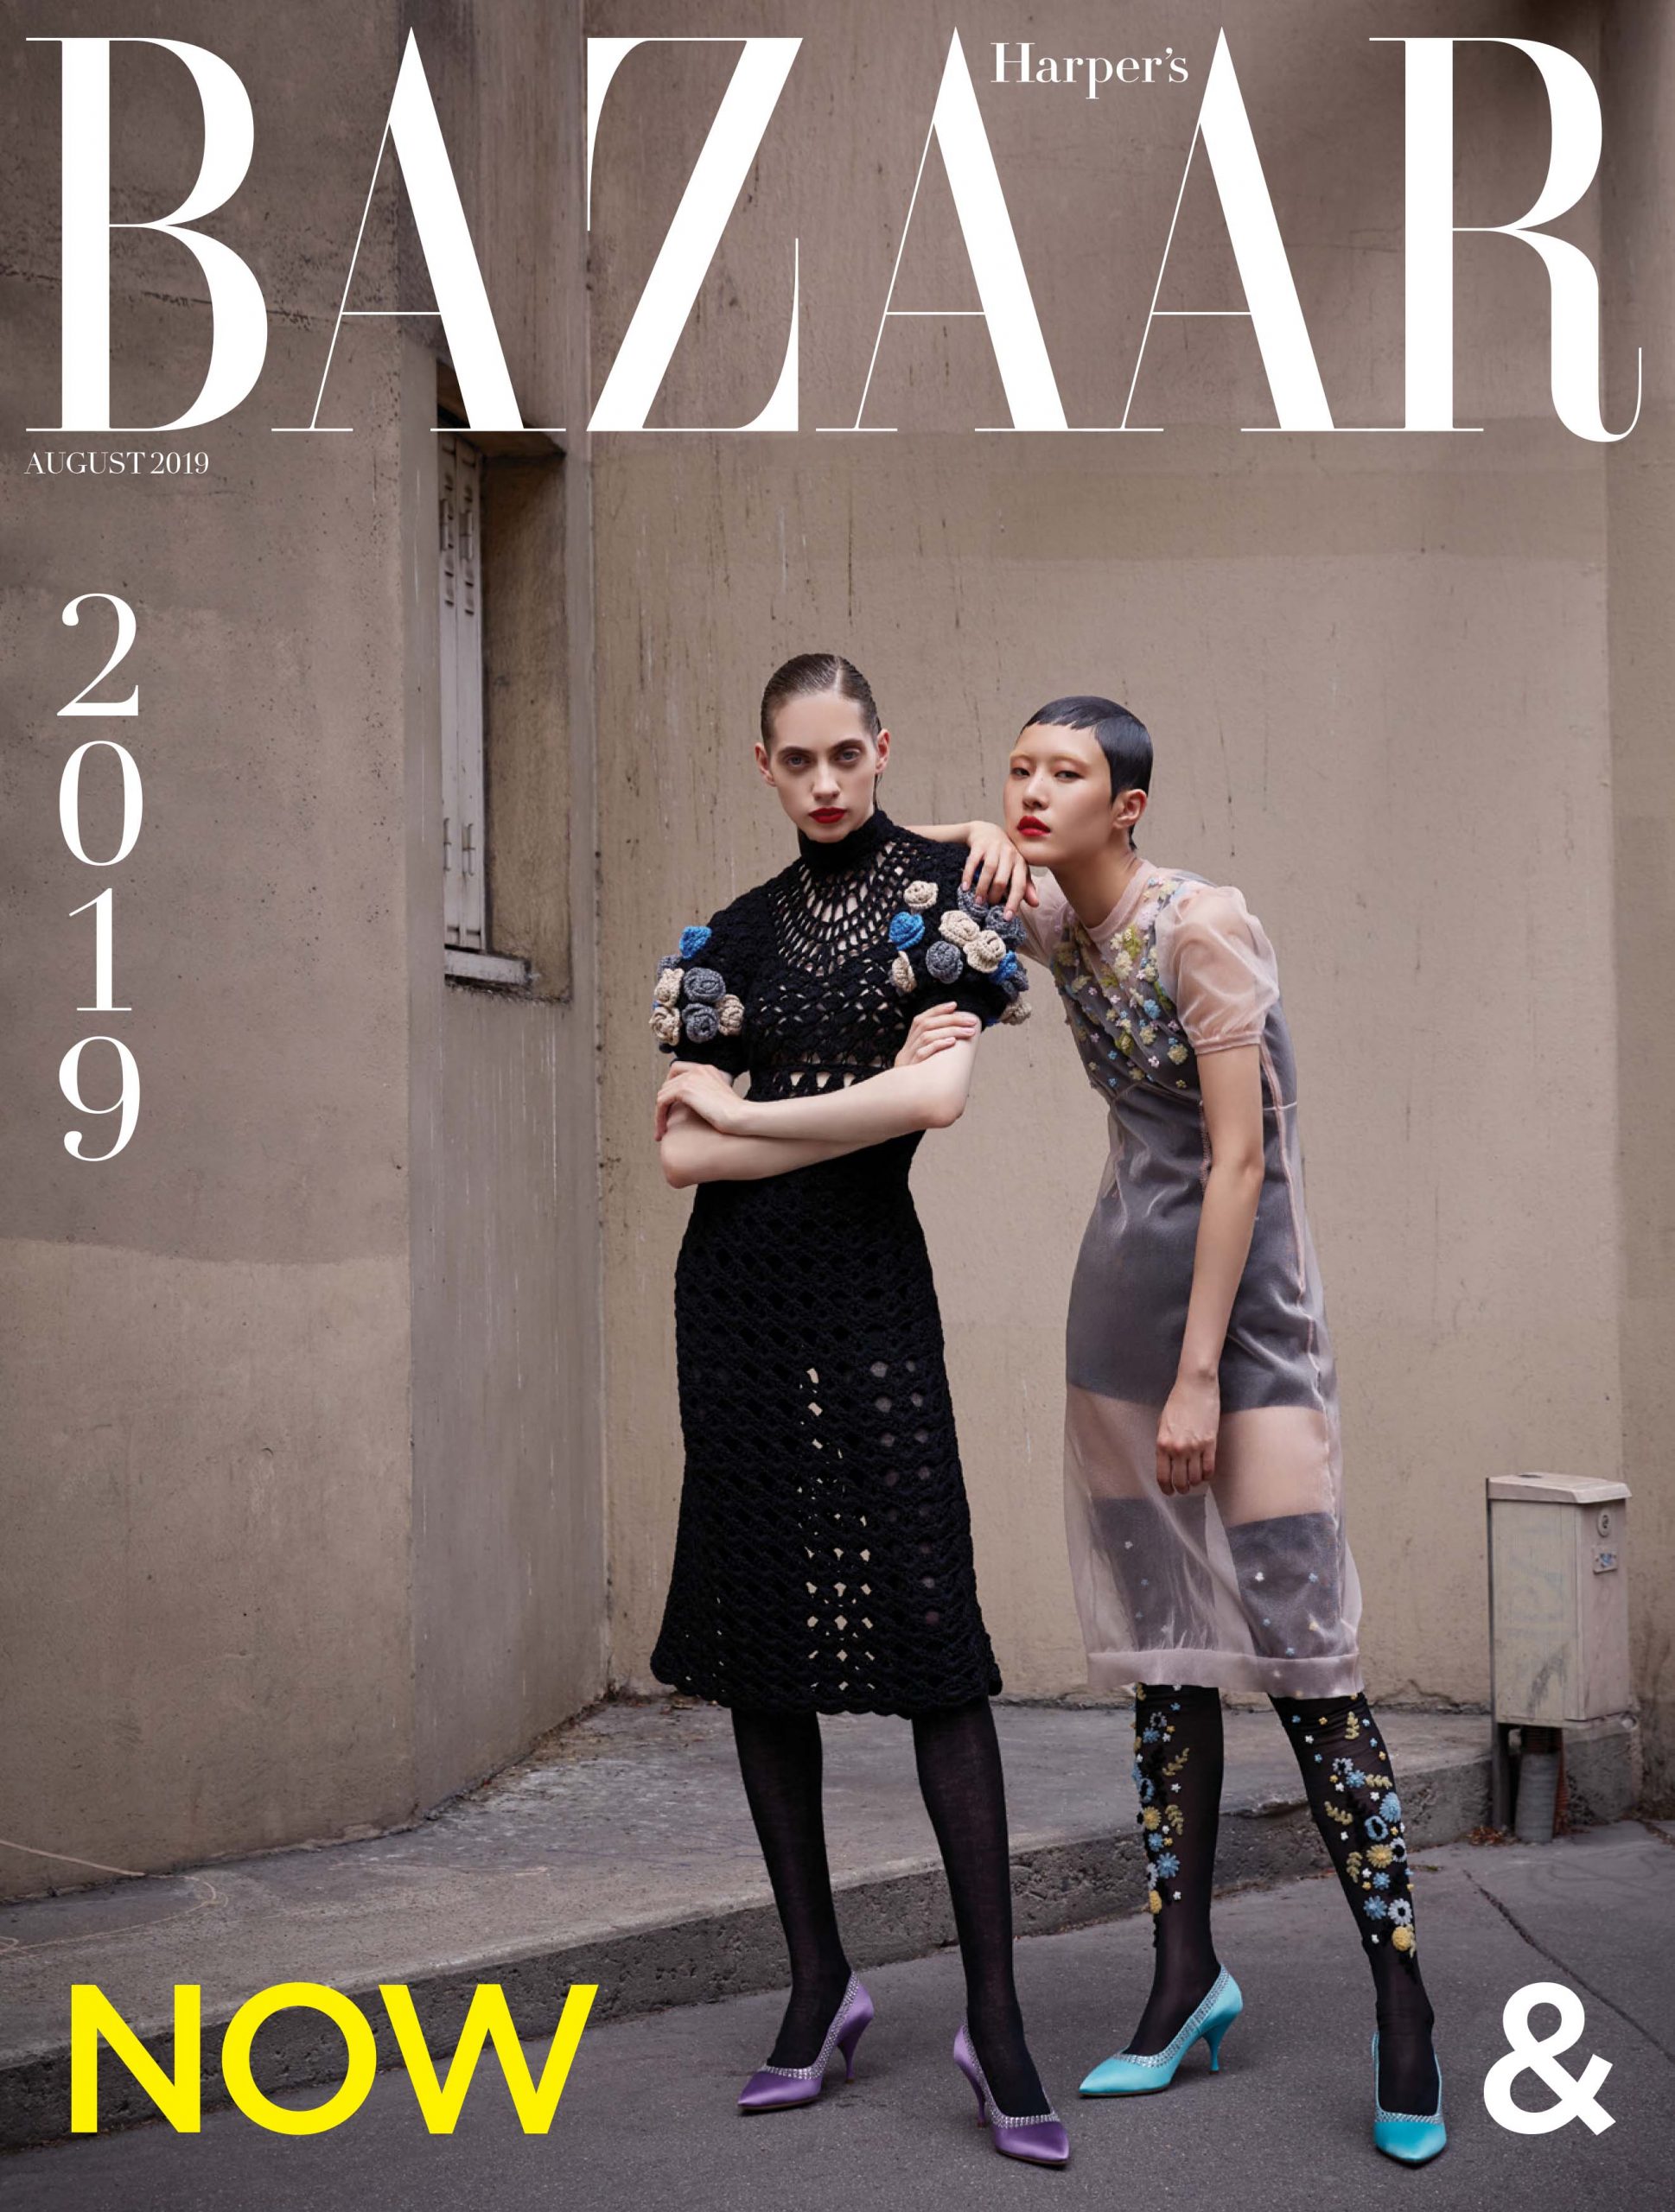 Harper's Bazaar Cover Story with Odette Pavlova and Sohyun by Rama Lee